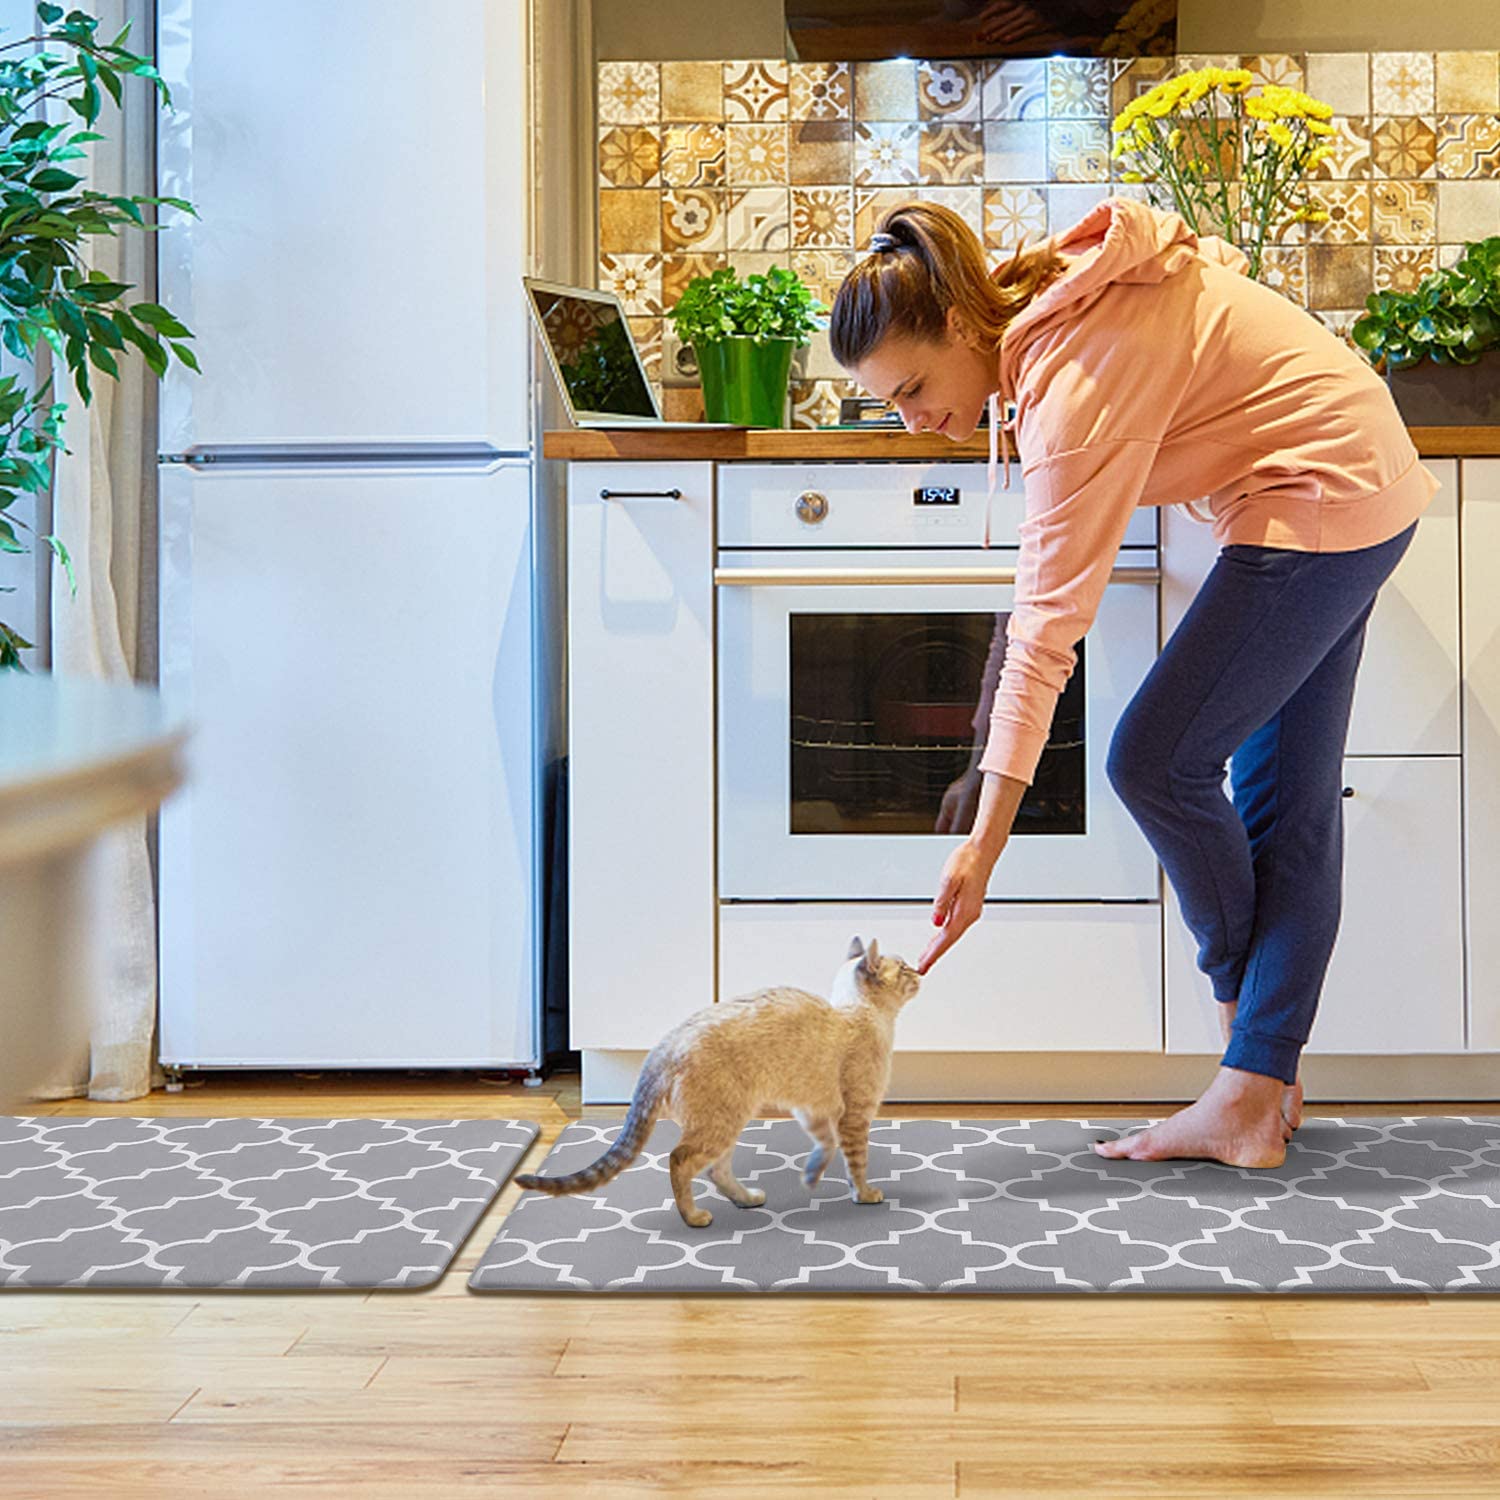 Kitchen Mat Cushioned Anti-Fatigue Kitchen Floor Mats, Thick Non-Slip  Waterproof Kitchen Rugs and Mats, Comfort Standing Mat for